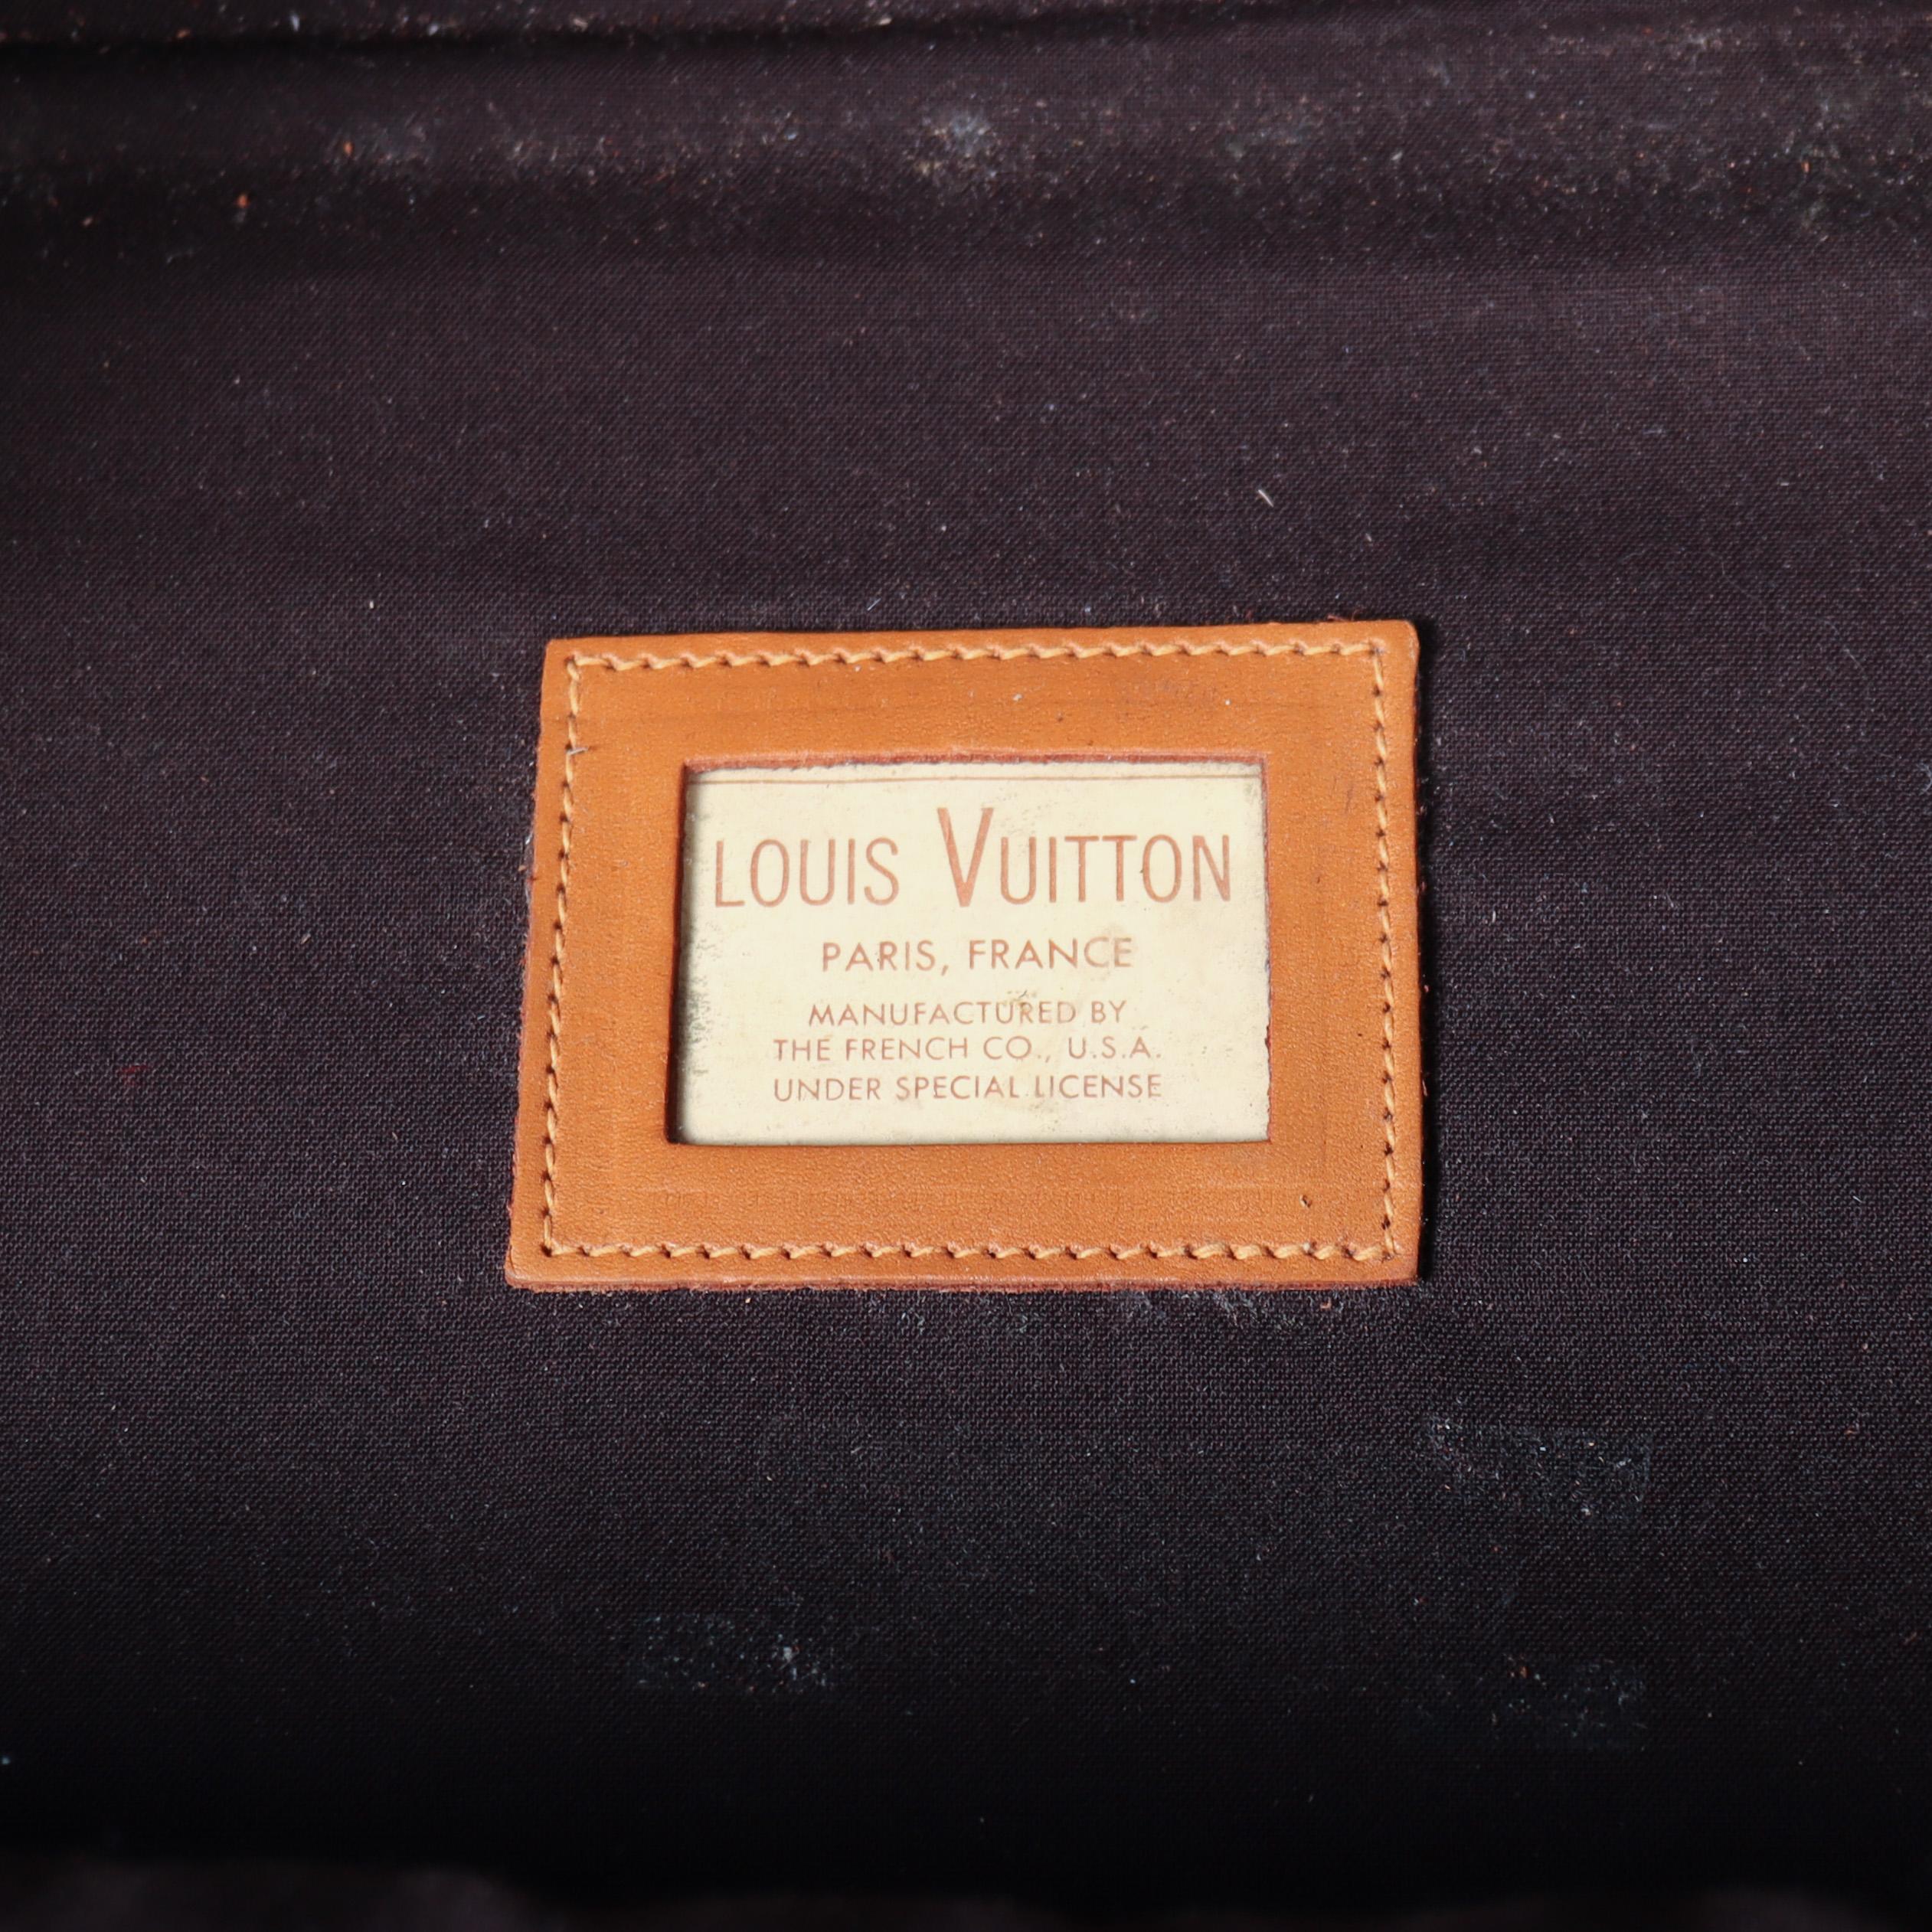 Louis Vuitton Suitcase In Good Condition For Sale In Leamington Spa, Warwickshire